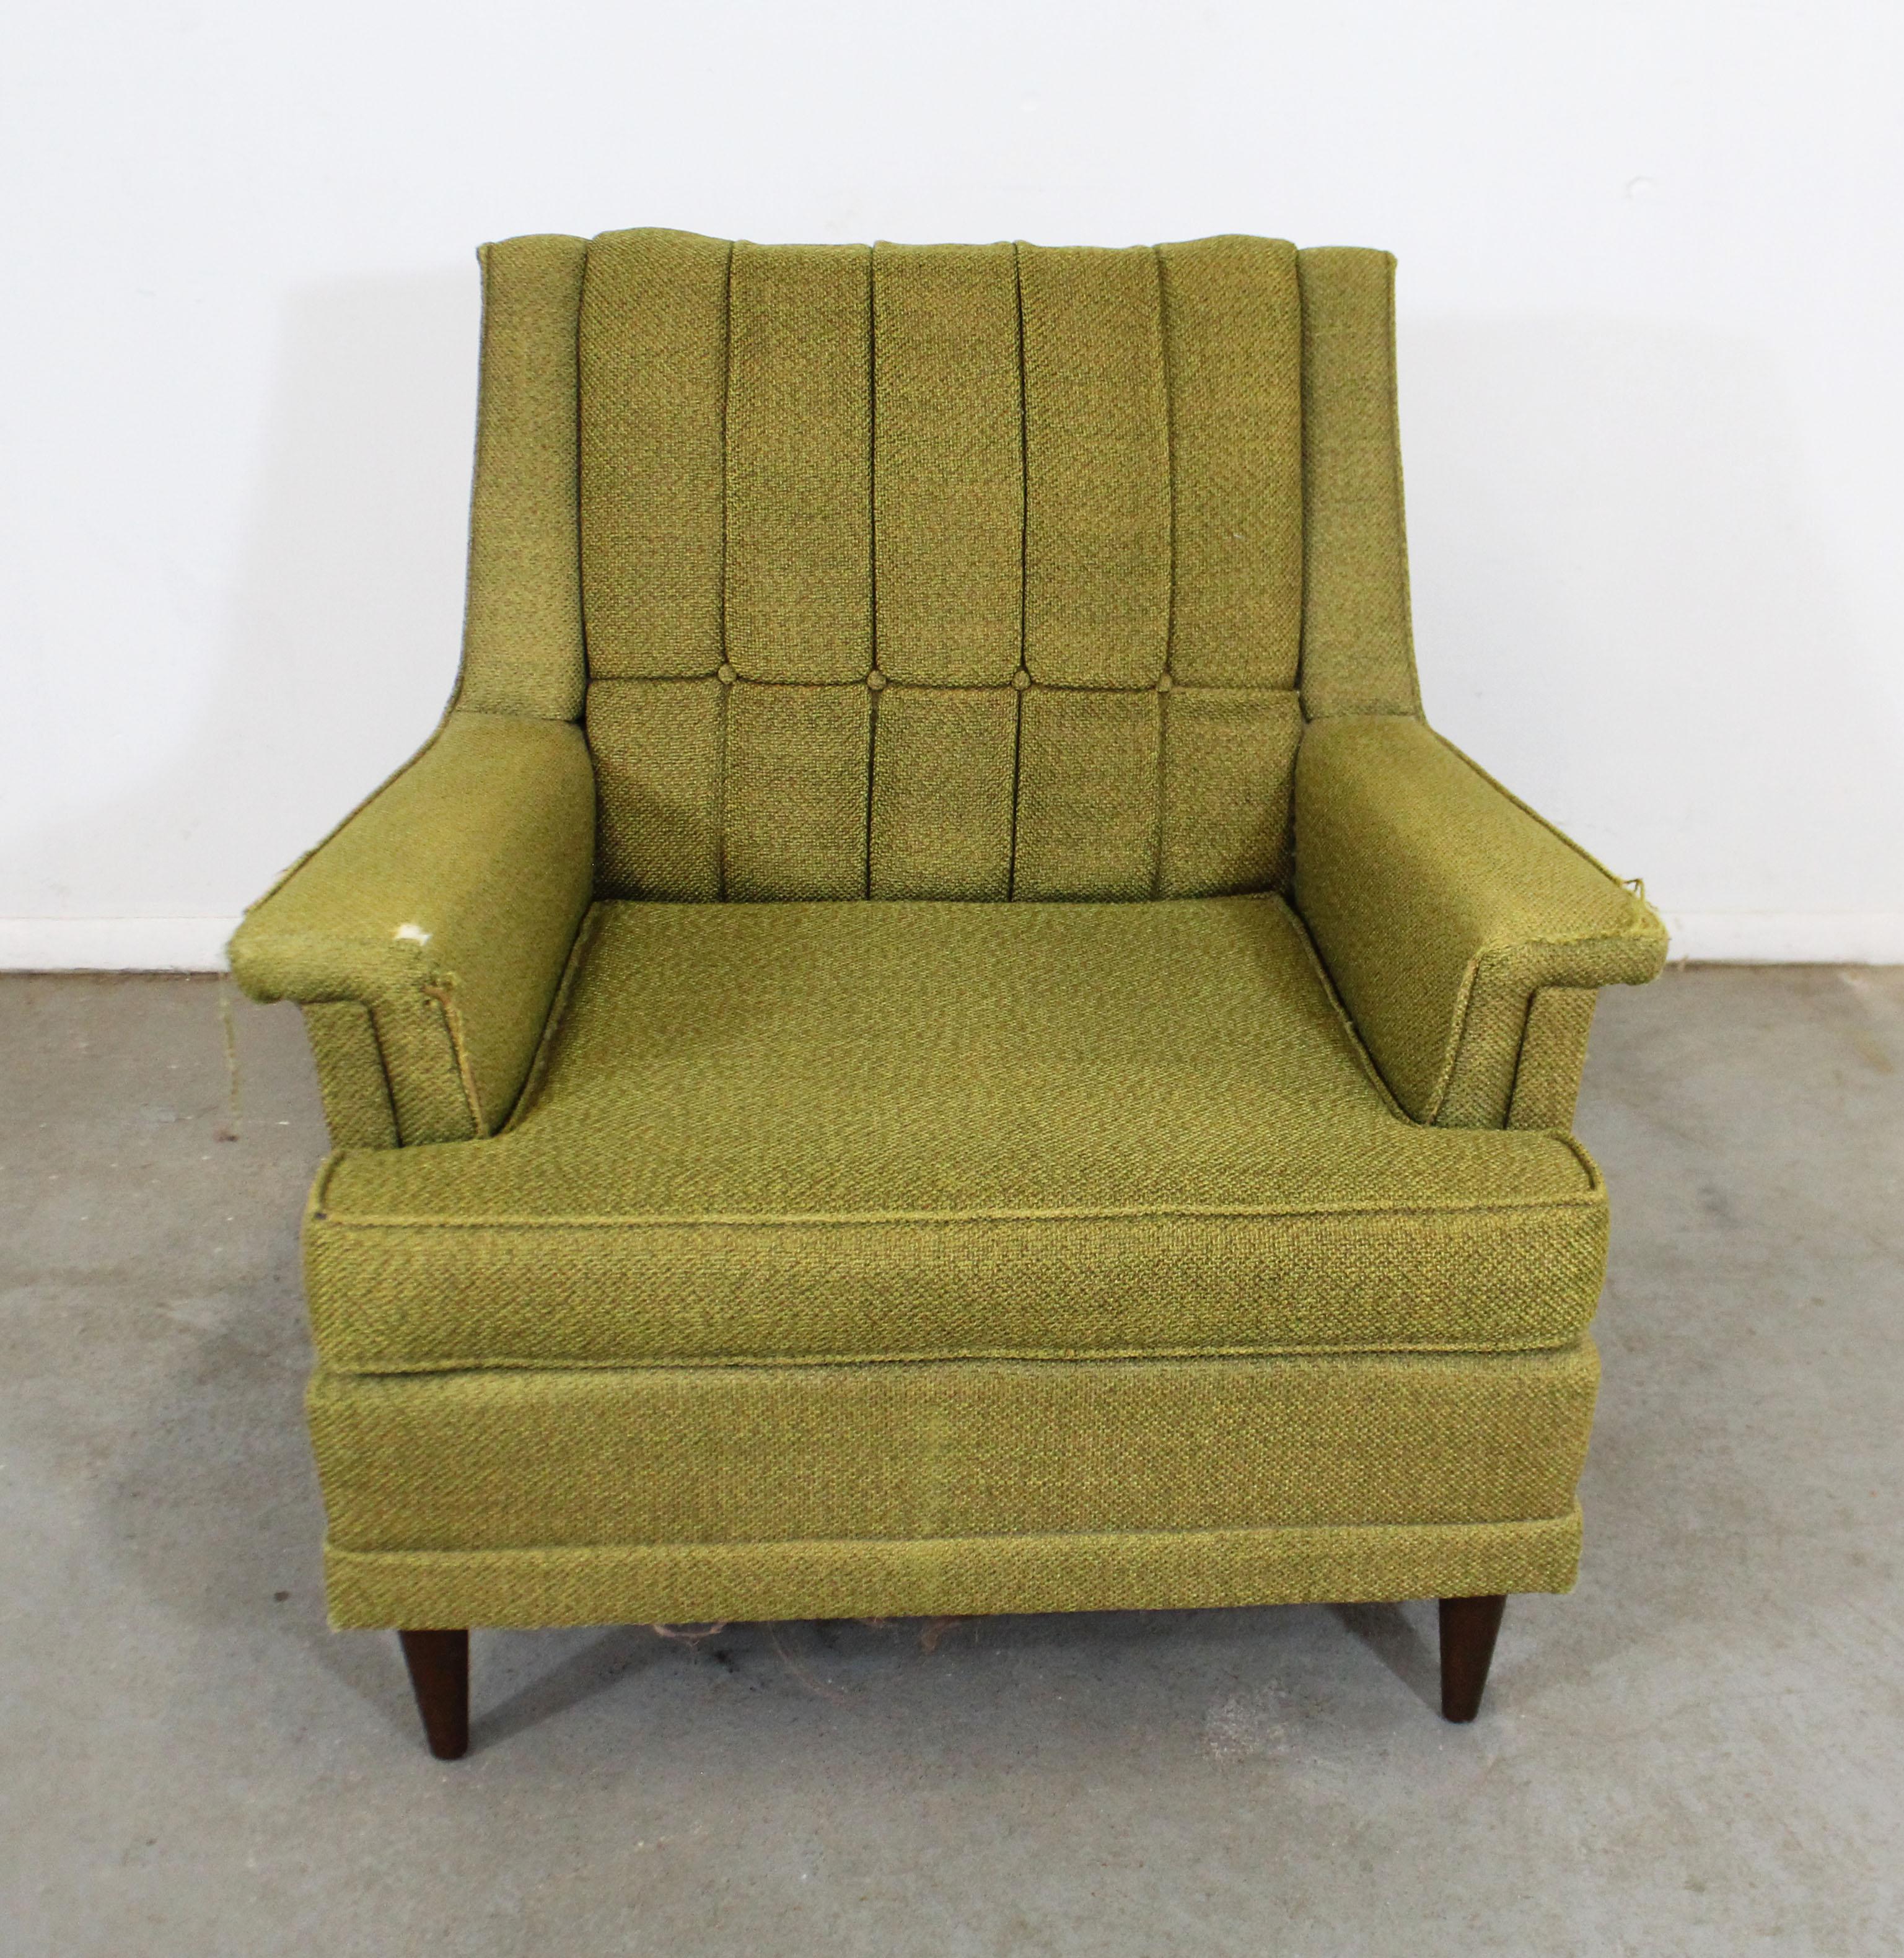 Offered is a vintage Mid-Century Modern lounge chair by Kroehler 'Galaxy'. This chair dates back to the 1950s, shows normal age wear including tears, discoloration, and needs to be reupholstered. It is structurally sound. It is signed by Kroehler.